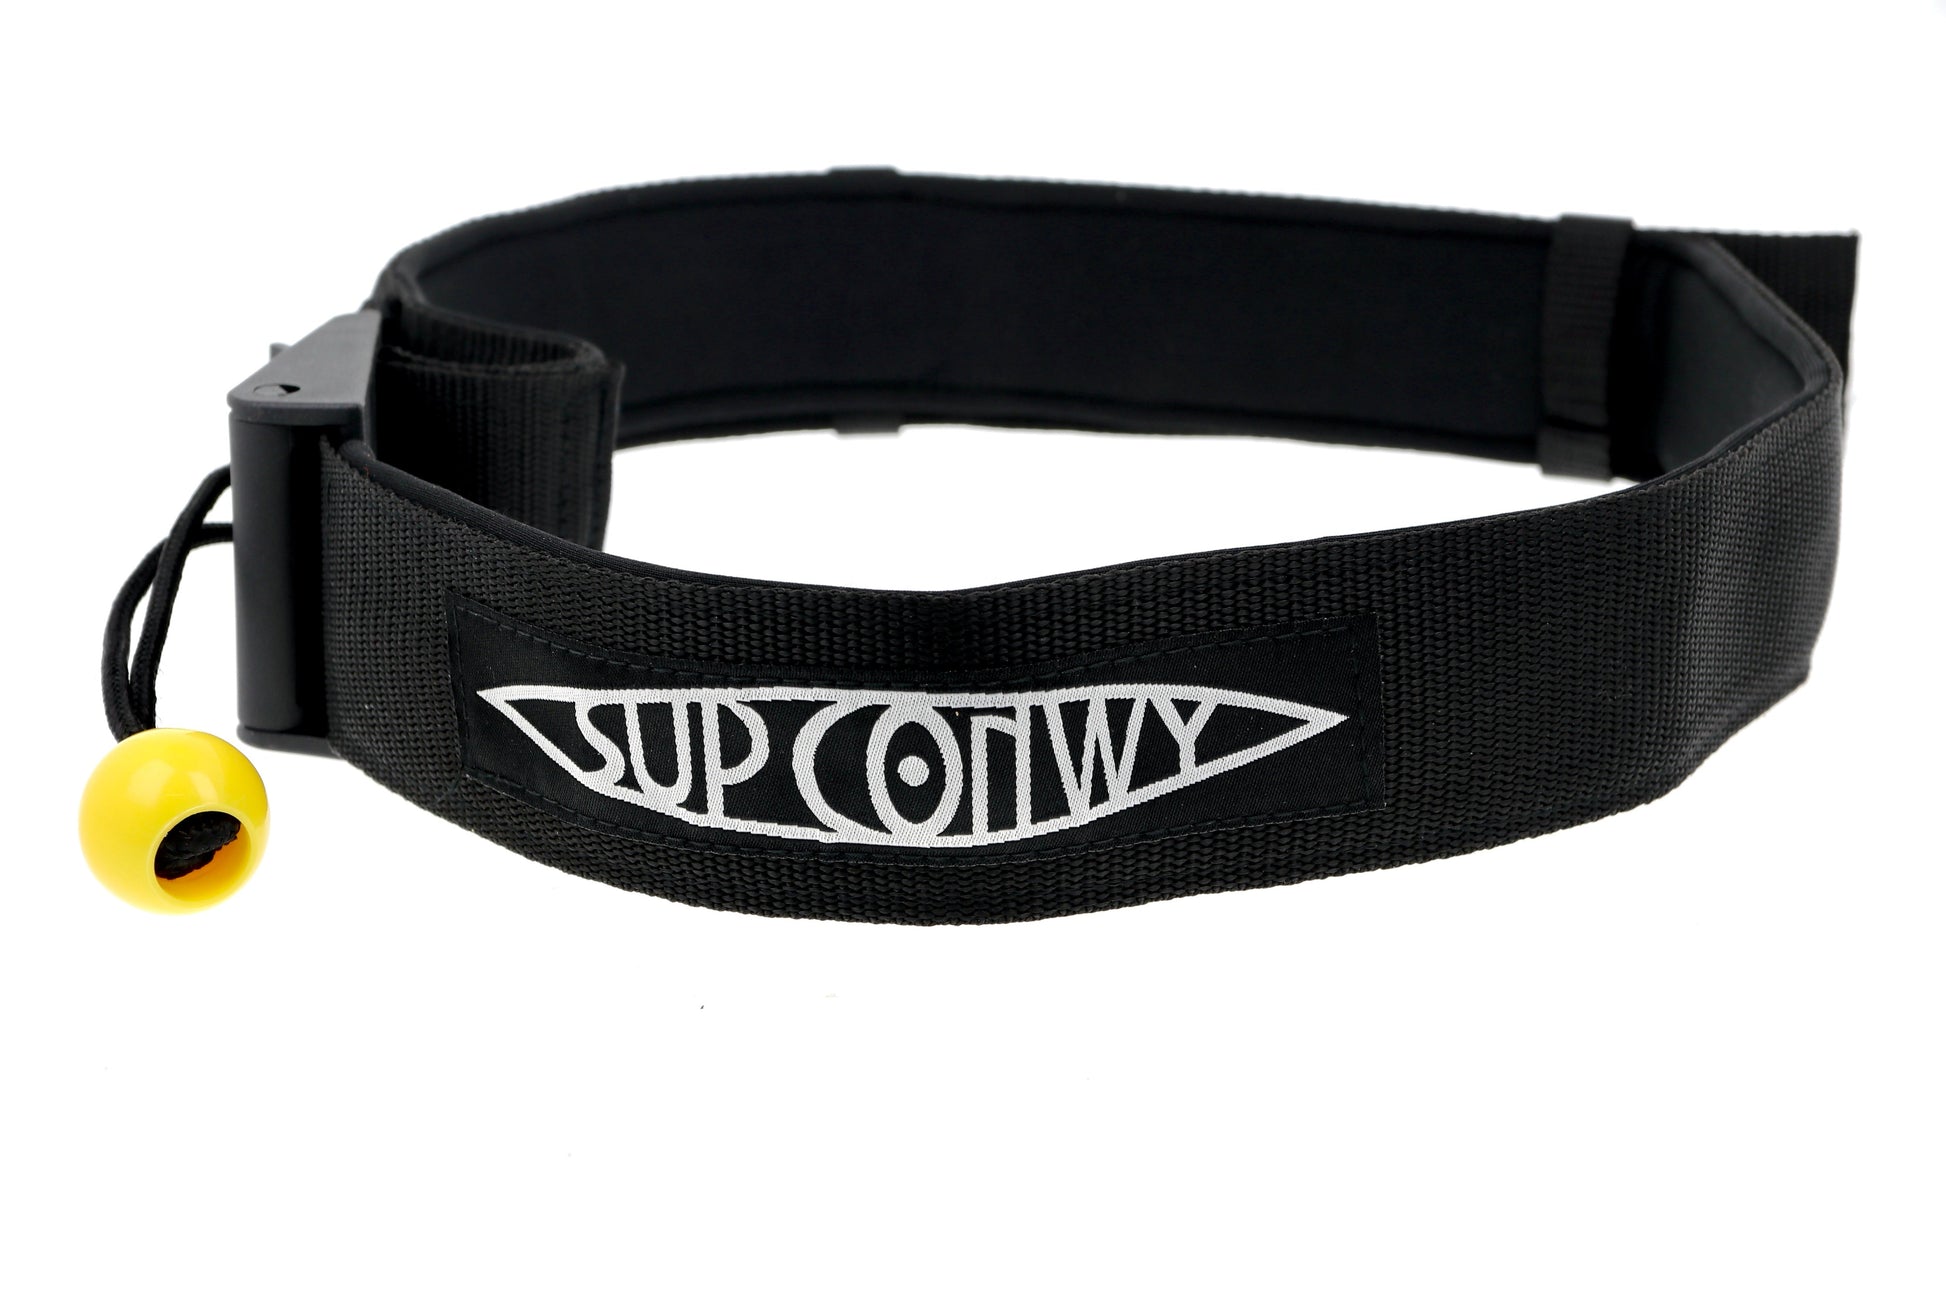 SUP Conwy - Quick Release Belt - 1